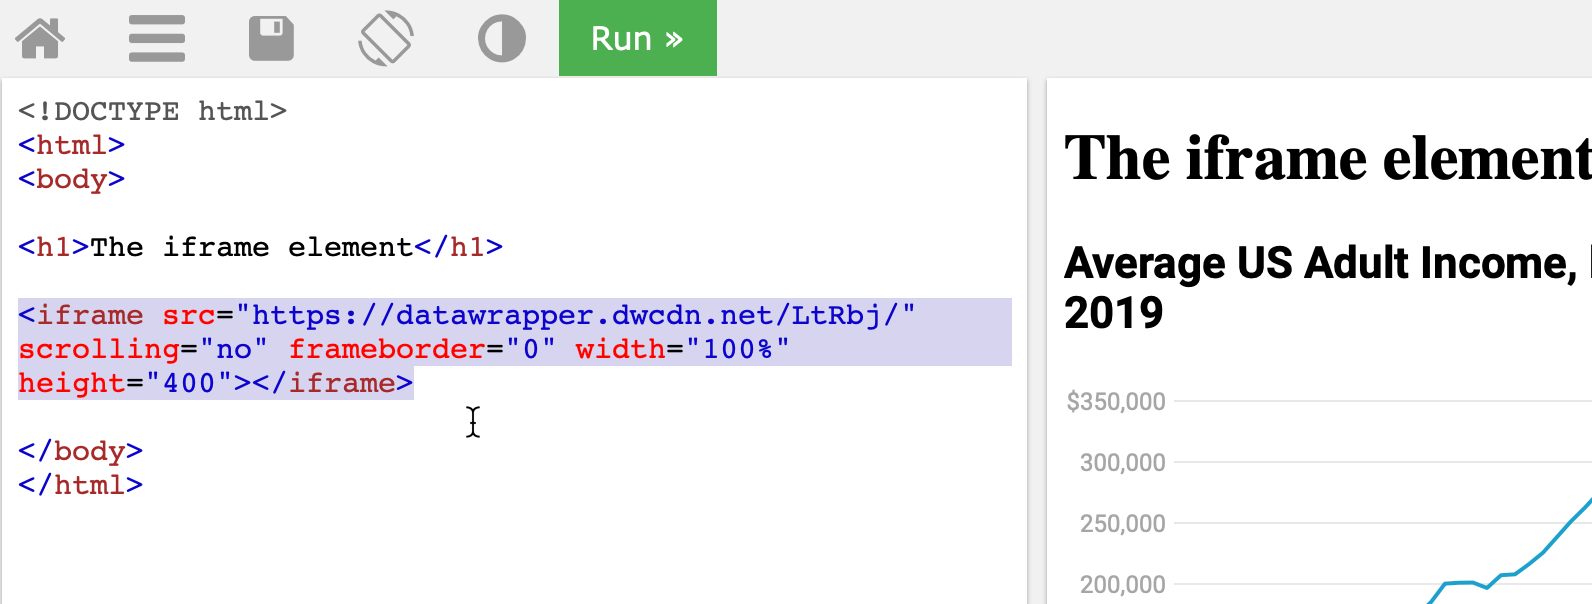 If a complex embed code does not work in your website, go back and try to edit it down into a simple iframe.